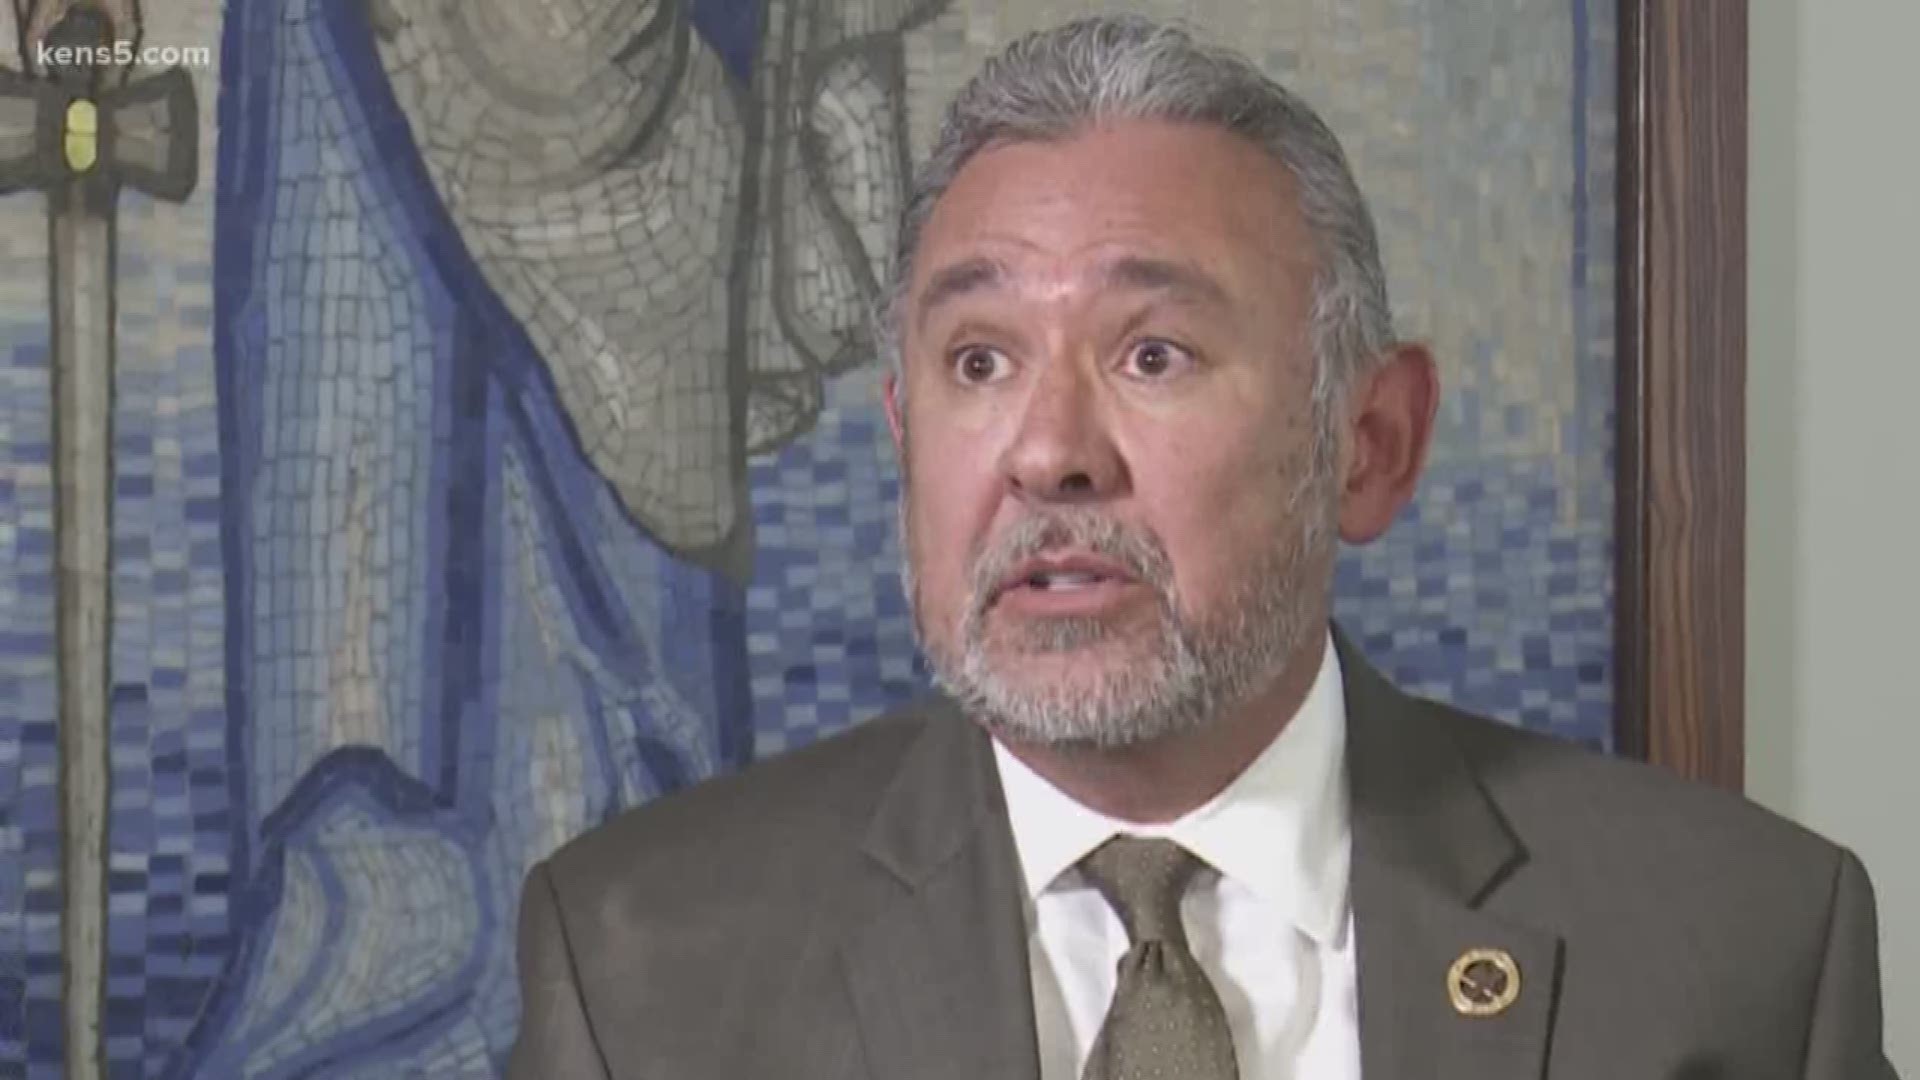 District attorney responds to outcry following plea deal comments in King Jay Davila case